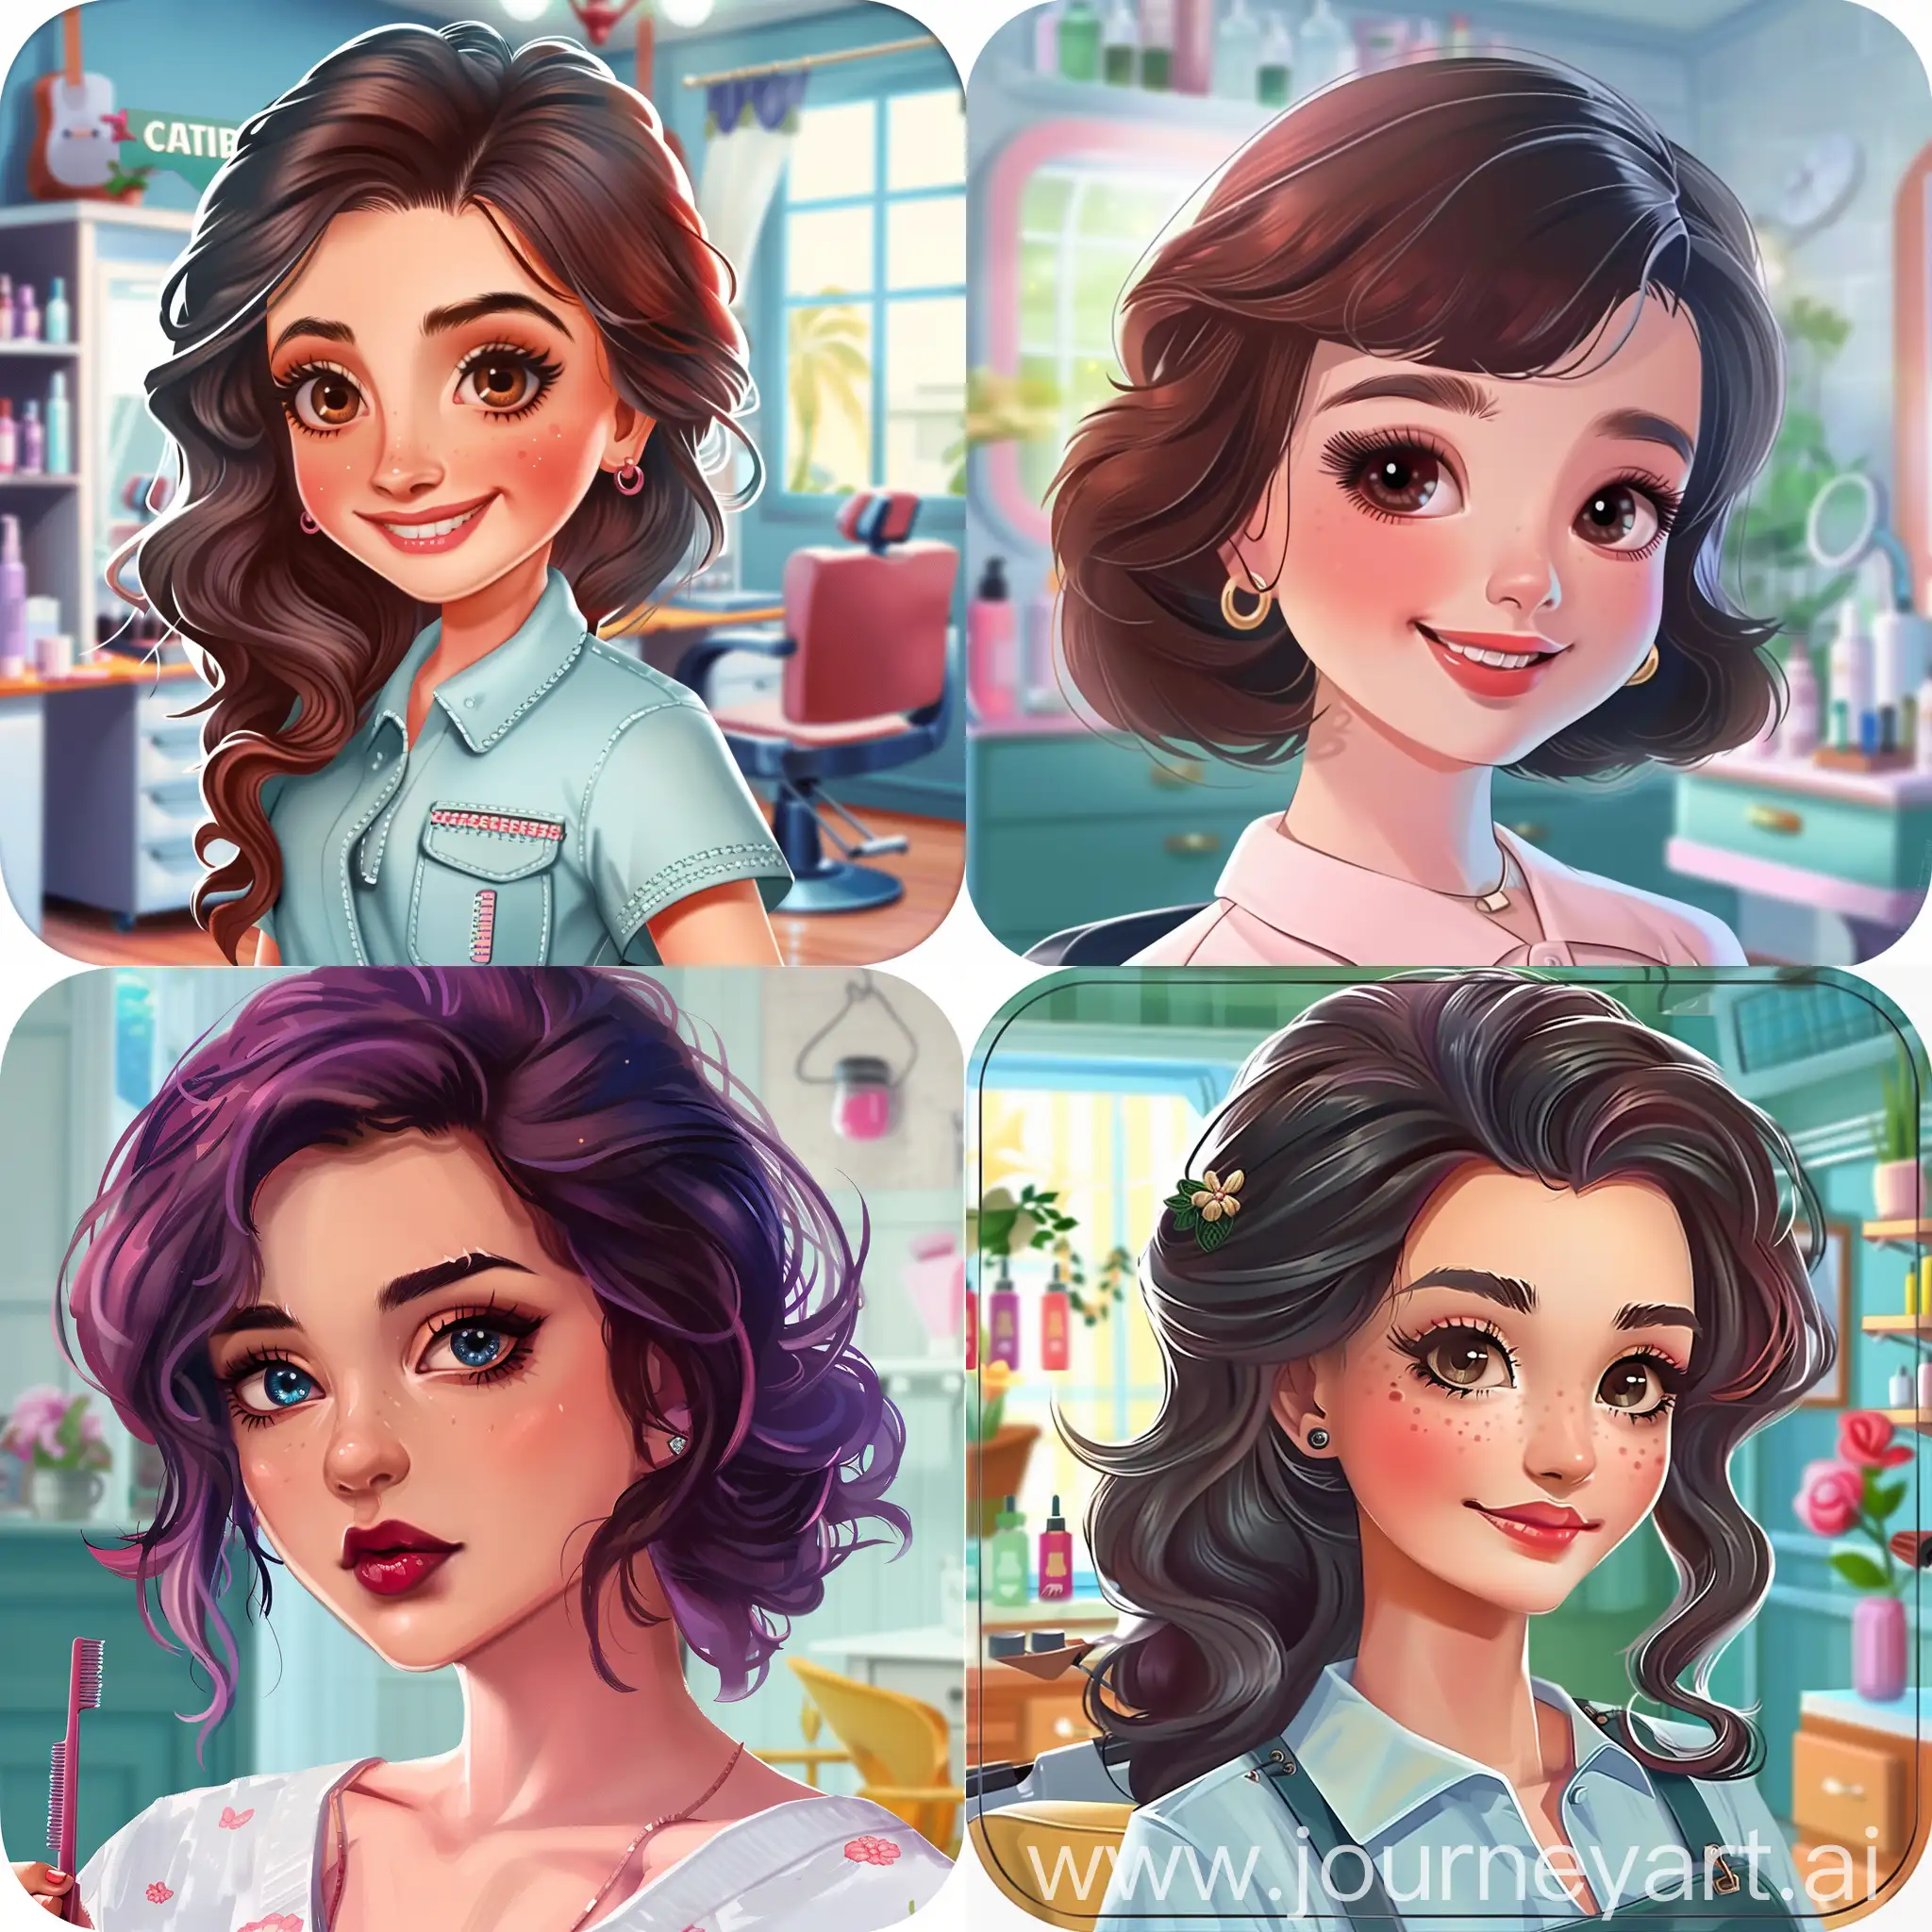 Cosmetology-Clinic-Game-Cover-Glamorous-Beauty-Salon-Experience